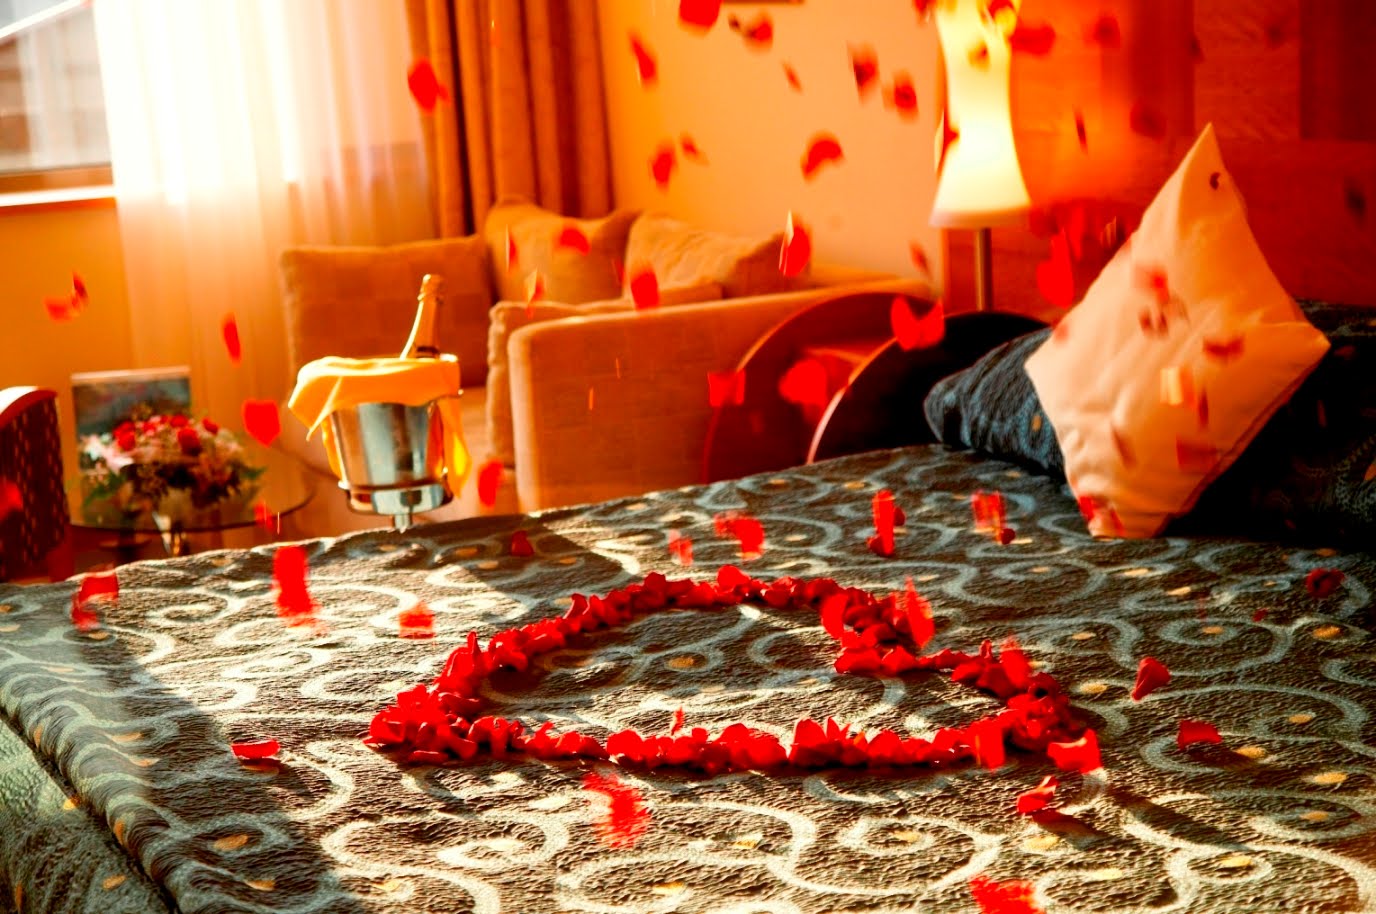 Bed of Roses: How to Spruce Up your Bedroom for a Romantic Evening